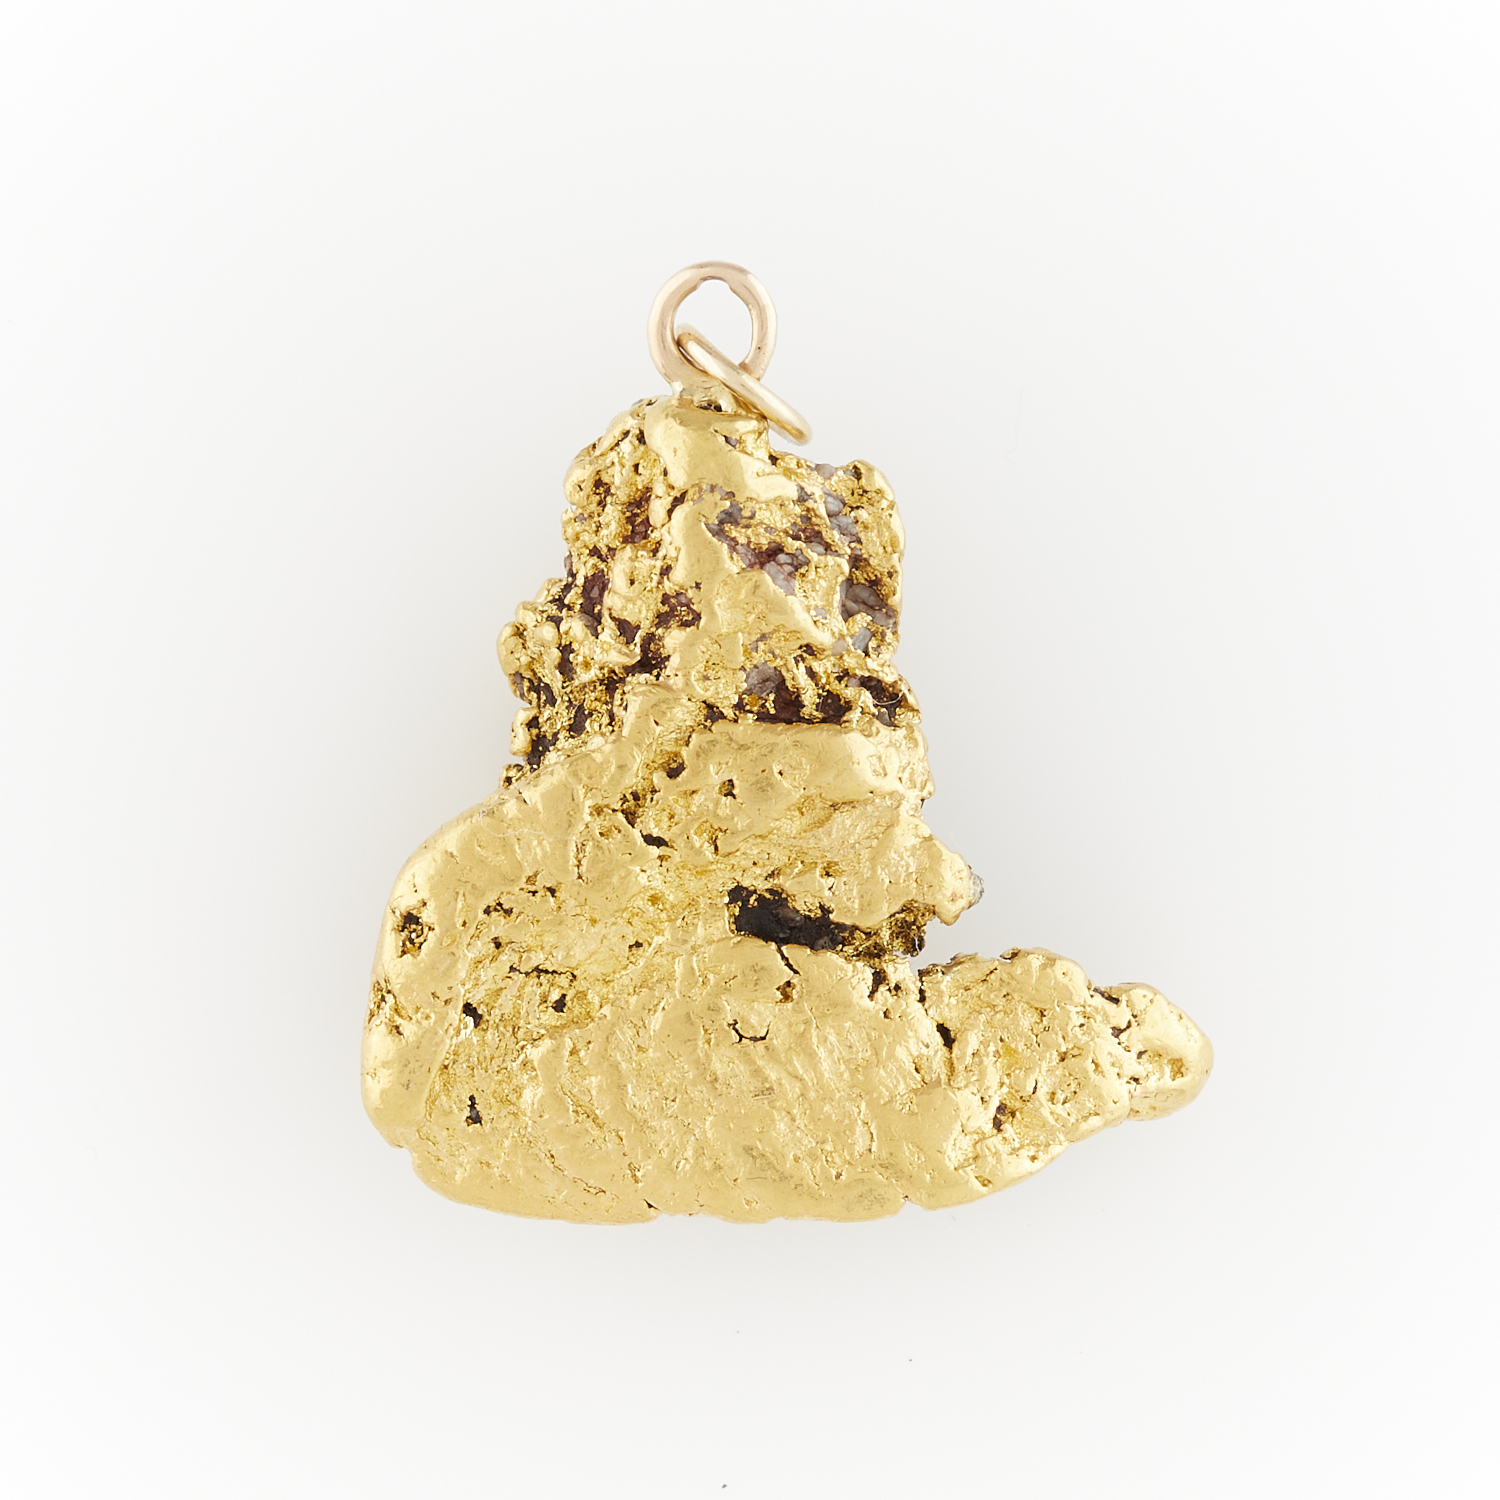 Large Gold Nugget Form Pendant - Image 3 of 5